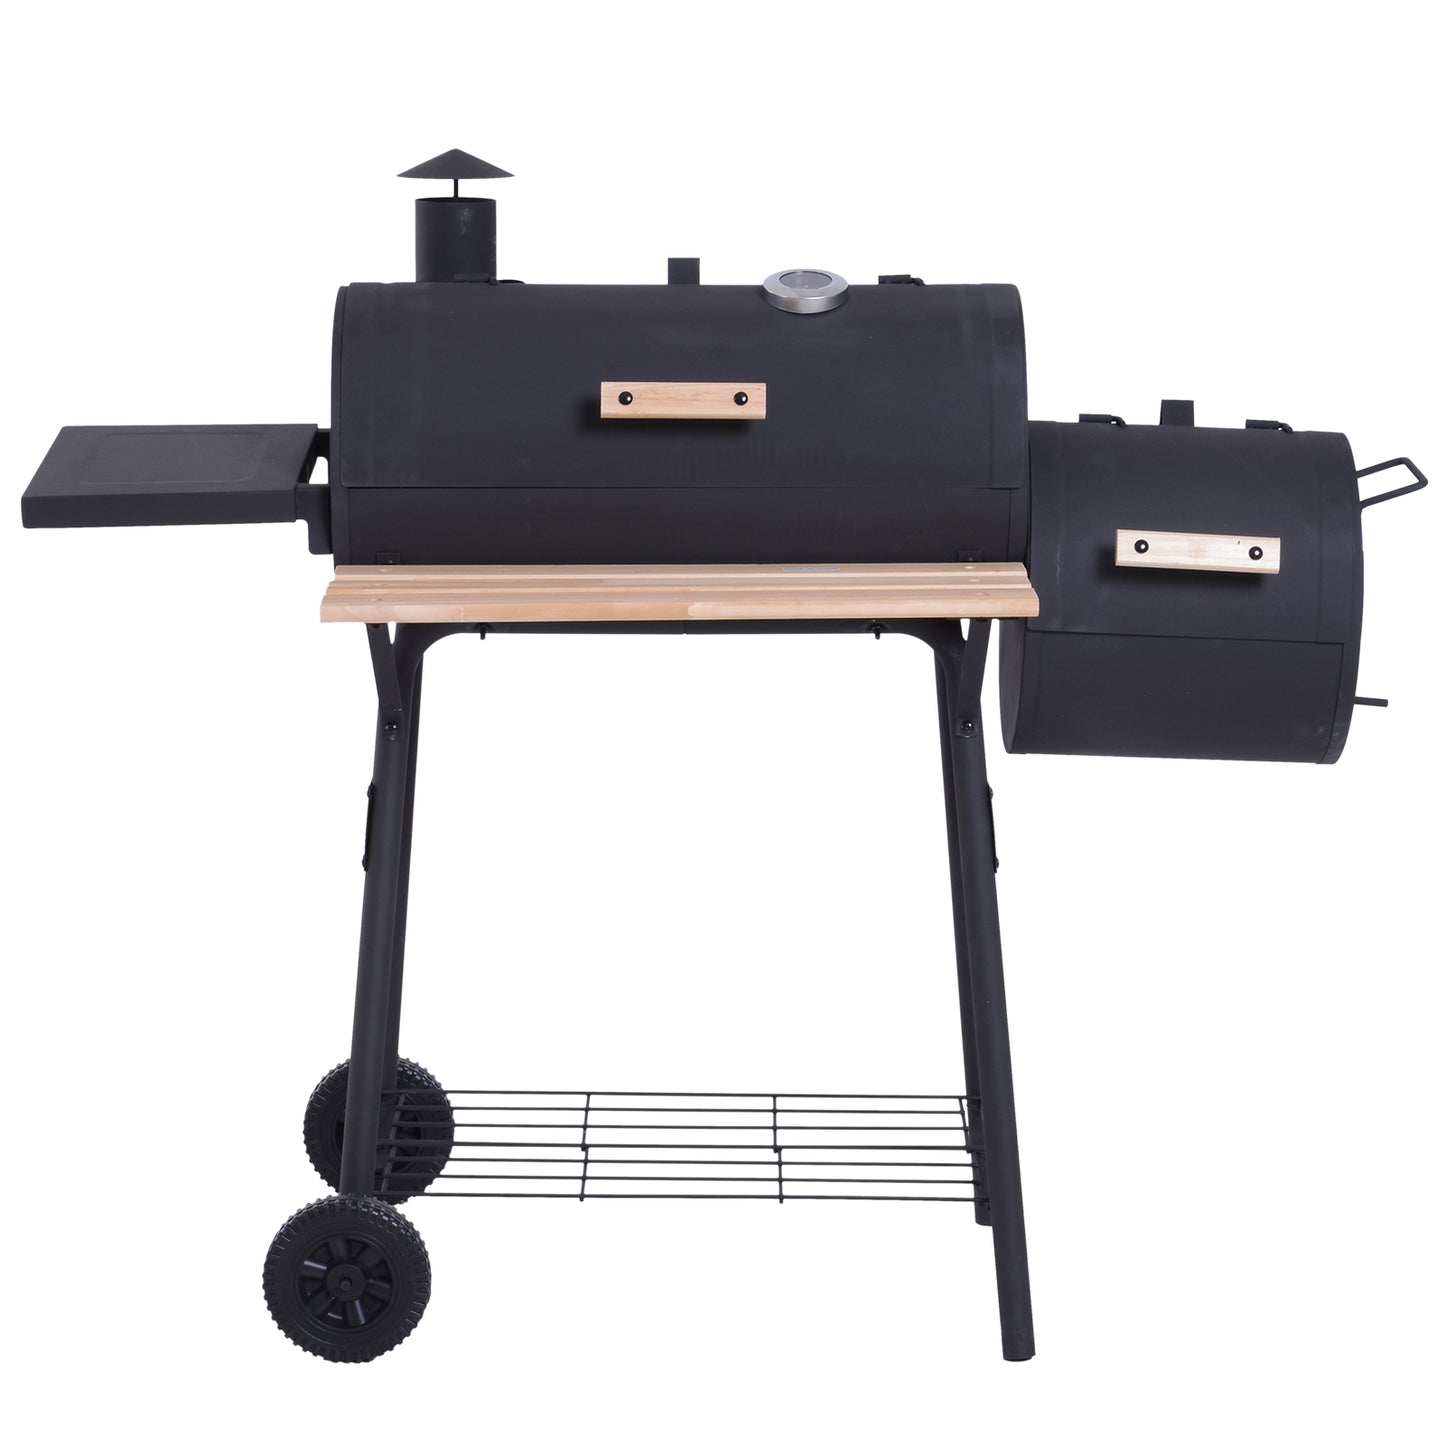 Outsunny Portable Charcoal BBQ Grill, Cold-rolled Steel, Solid Wood, 104H x 124L x53W cm-Black